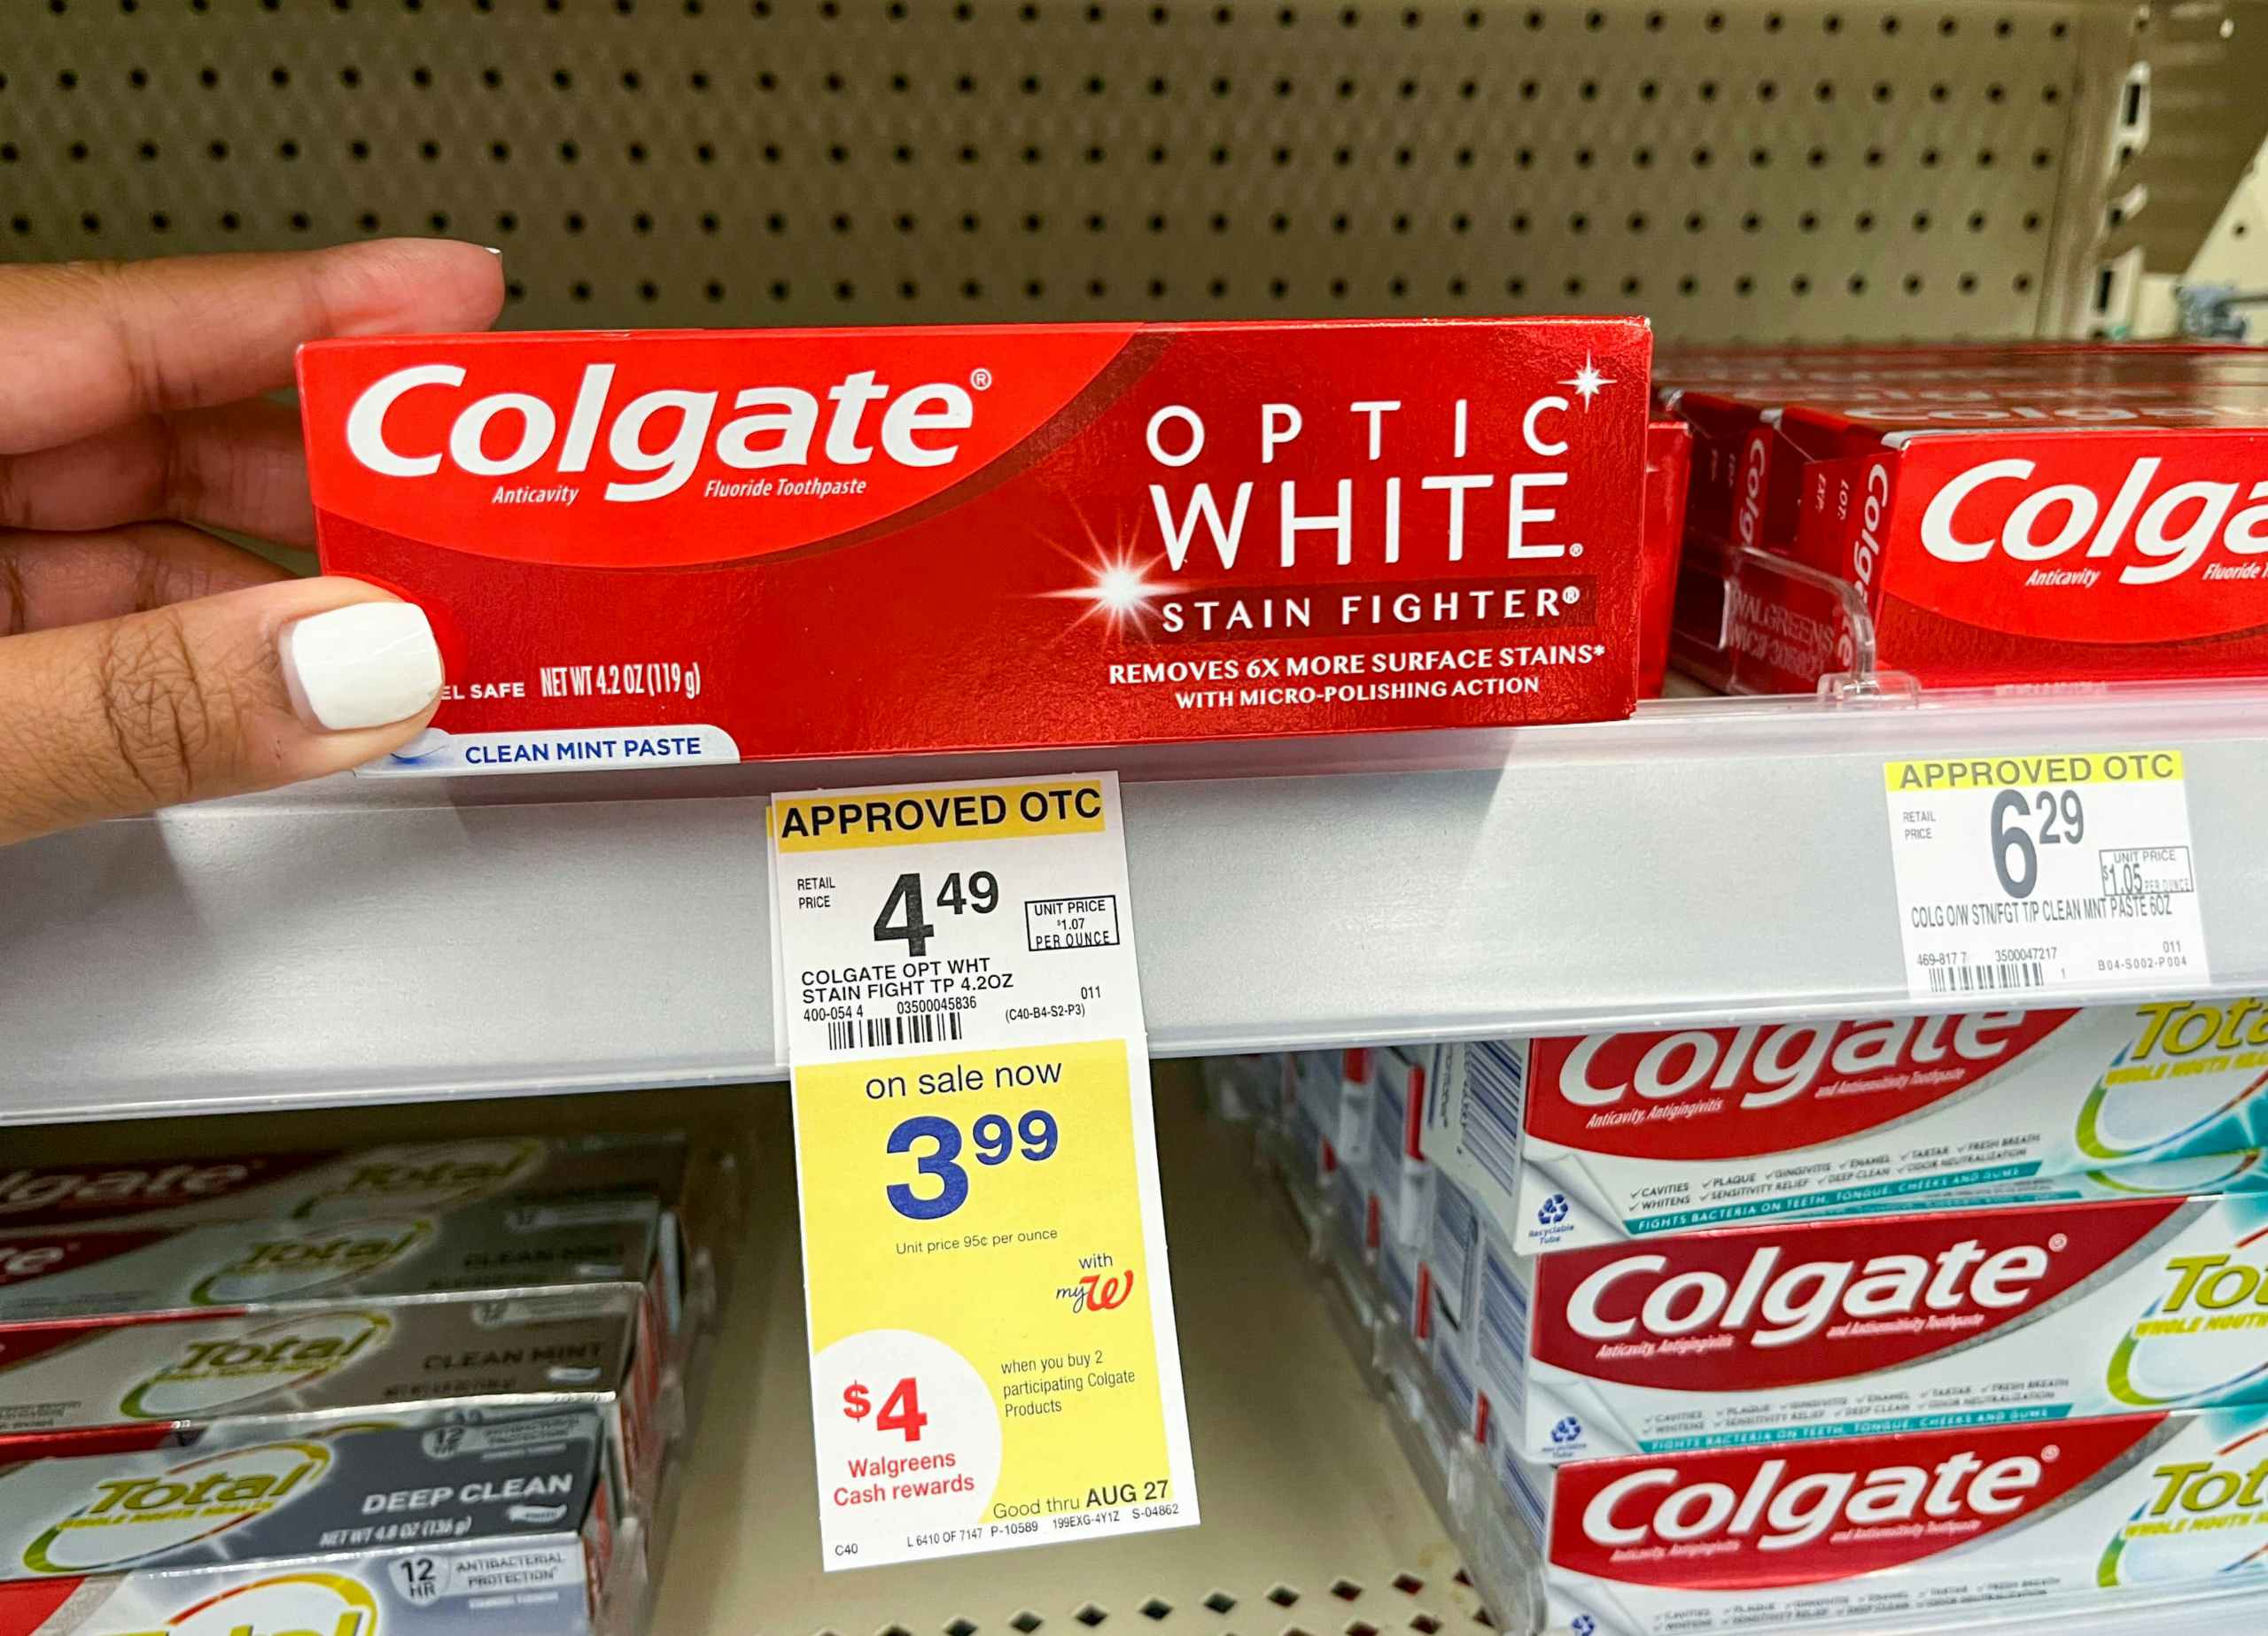 hand touching box of colgate Optic White stainfighter toothpaste on shelf with sales tag underneath